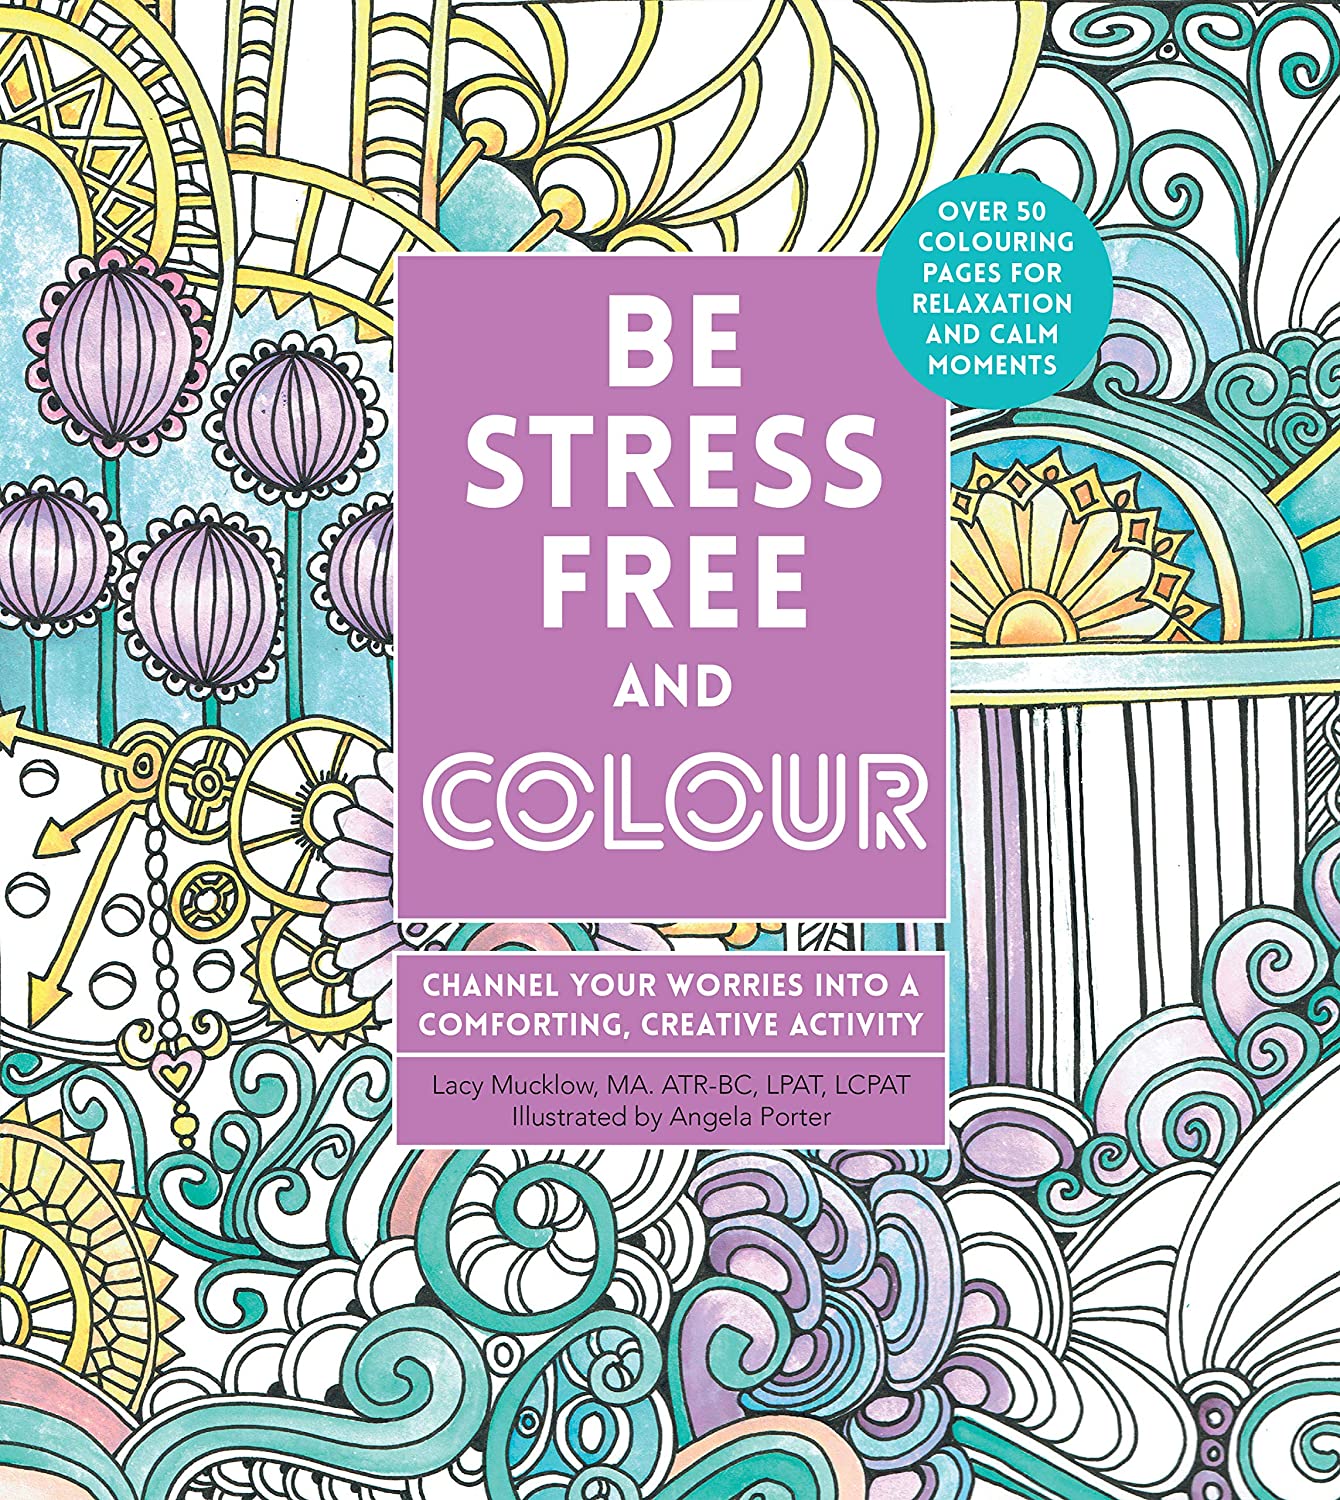 Walter Foster - Be Stress Free and Colour